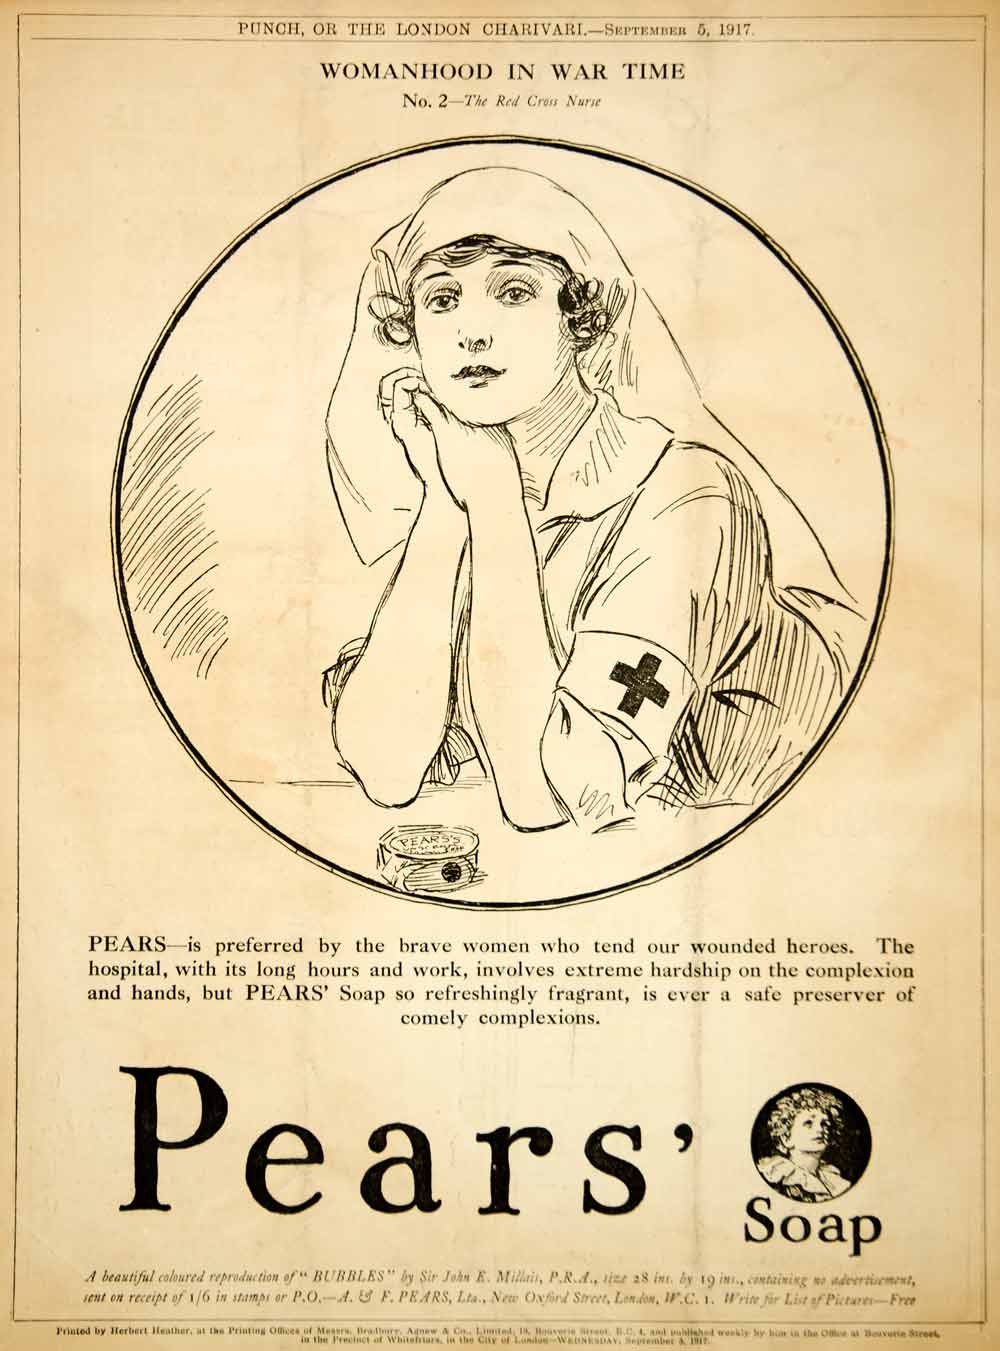 Pears Soap WWI propaganda for the brave woman who tends wounded warriors